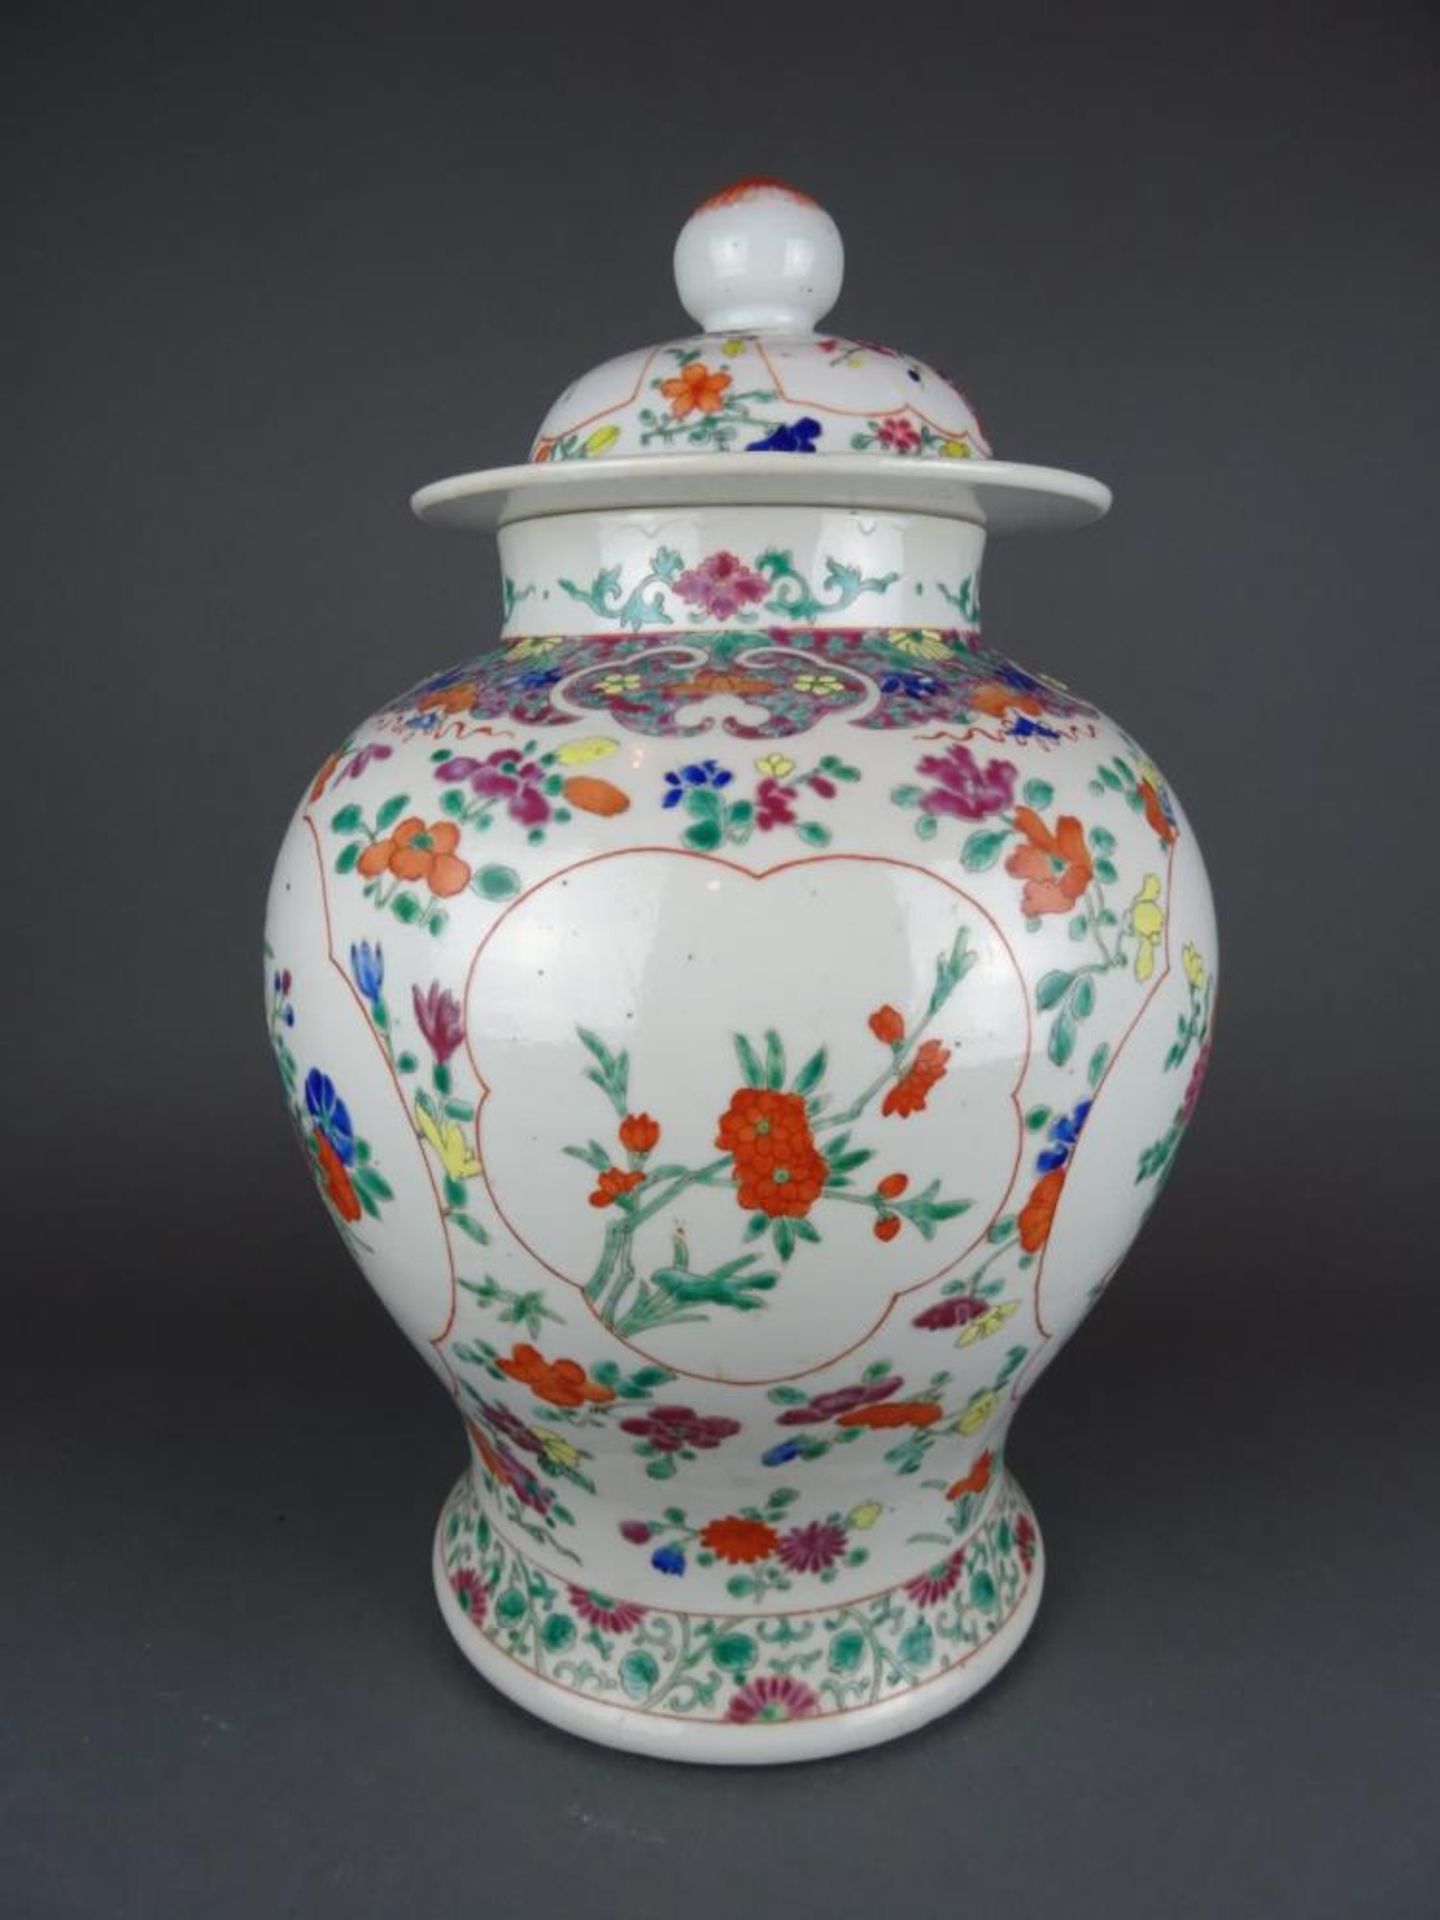 Chinese porcelain Famille rose vase with flowers - Qianlong mark